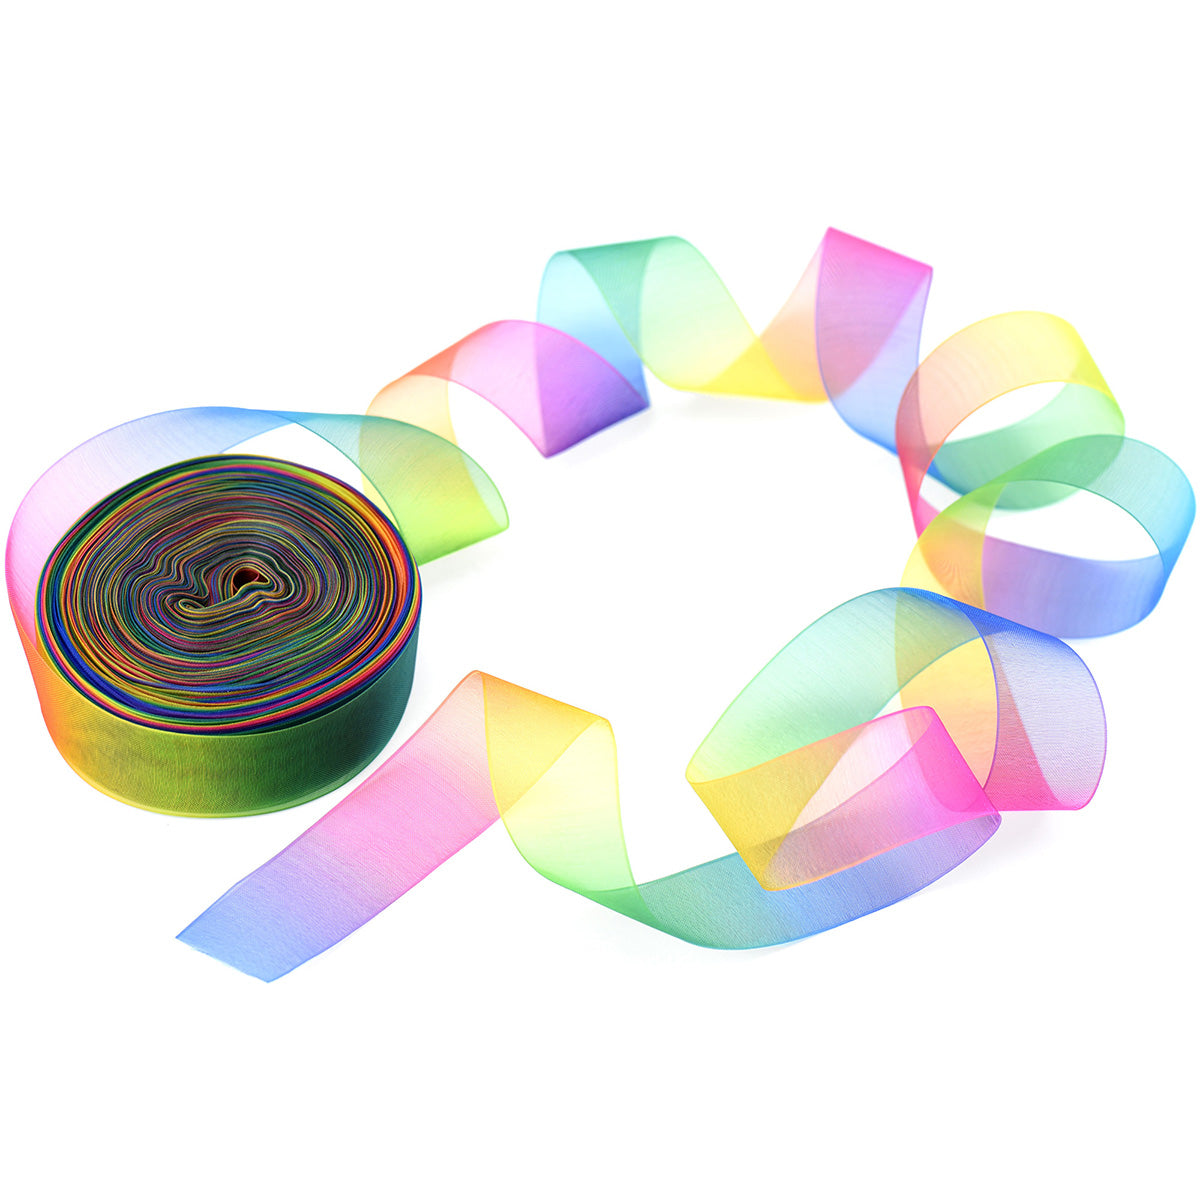 25mm [45 metres/50 Yards] Rainbow Chiffon Gradient Polyester Ribbon | Party Festive Gift Wrap Scrapbooking Decoration